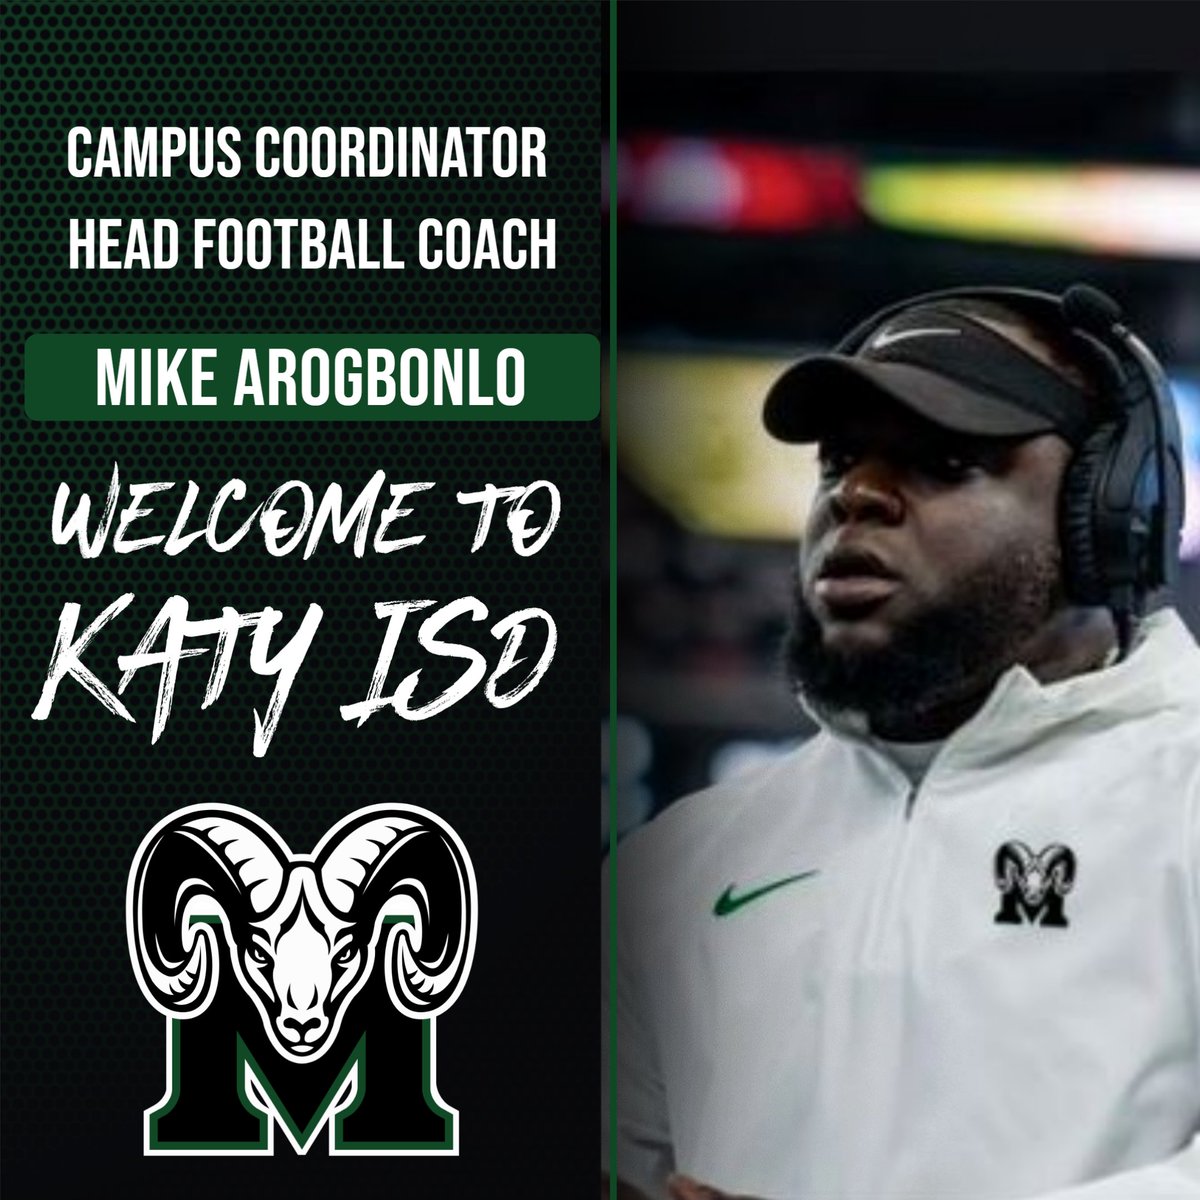 We want to welcome @CoachAro44 as the new Campus Coordinator / Head Football Coach at Mayde Creek High School!